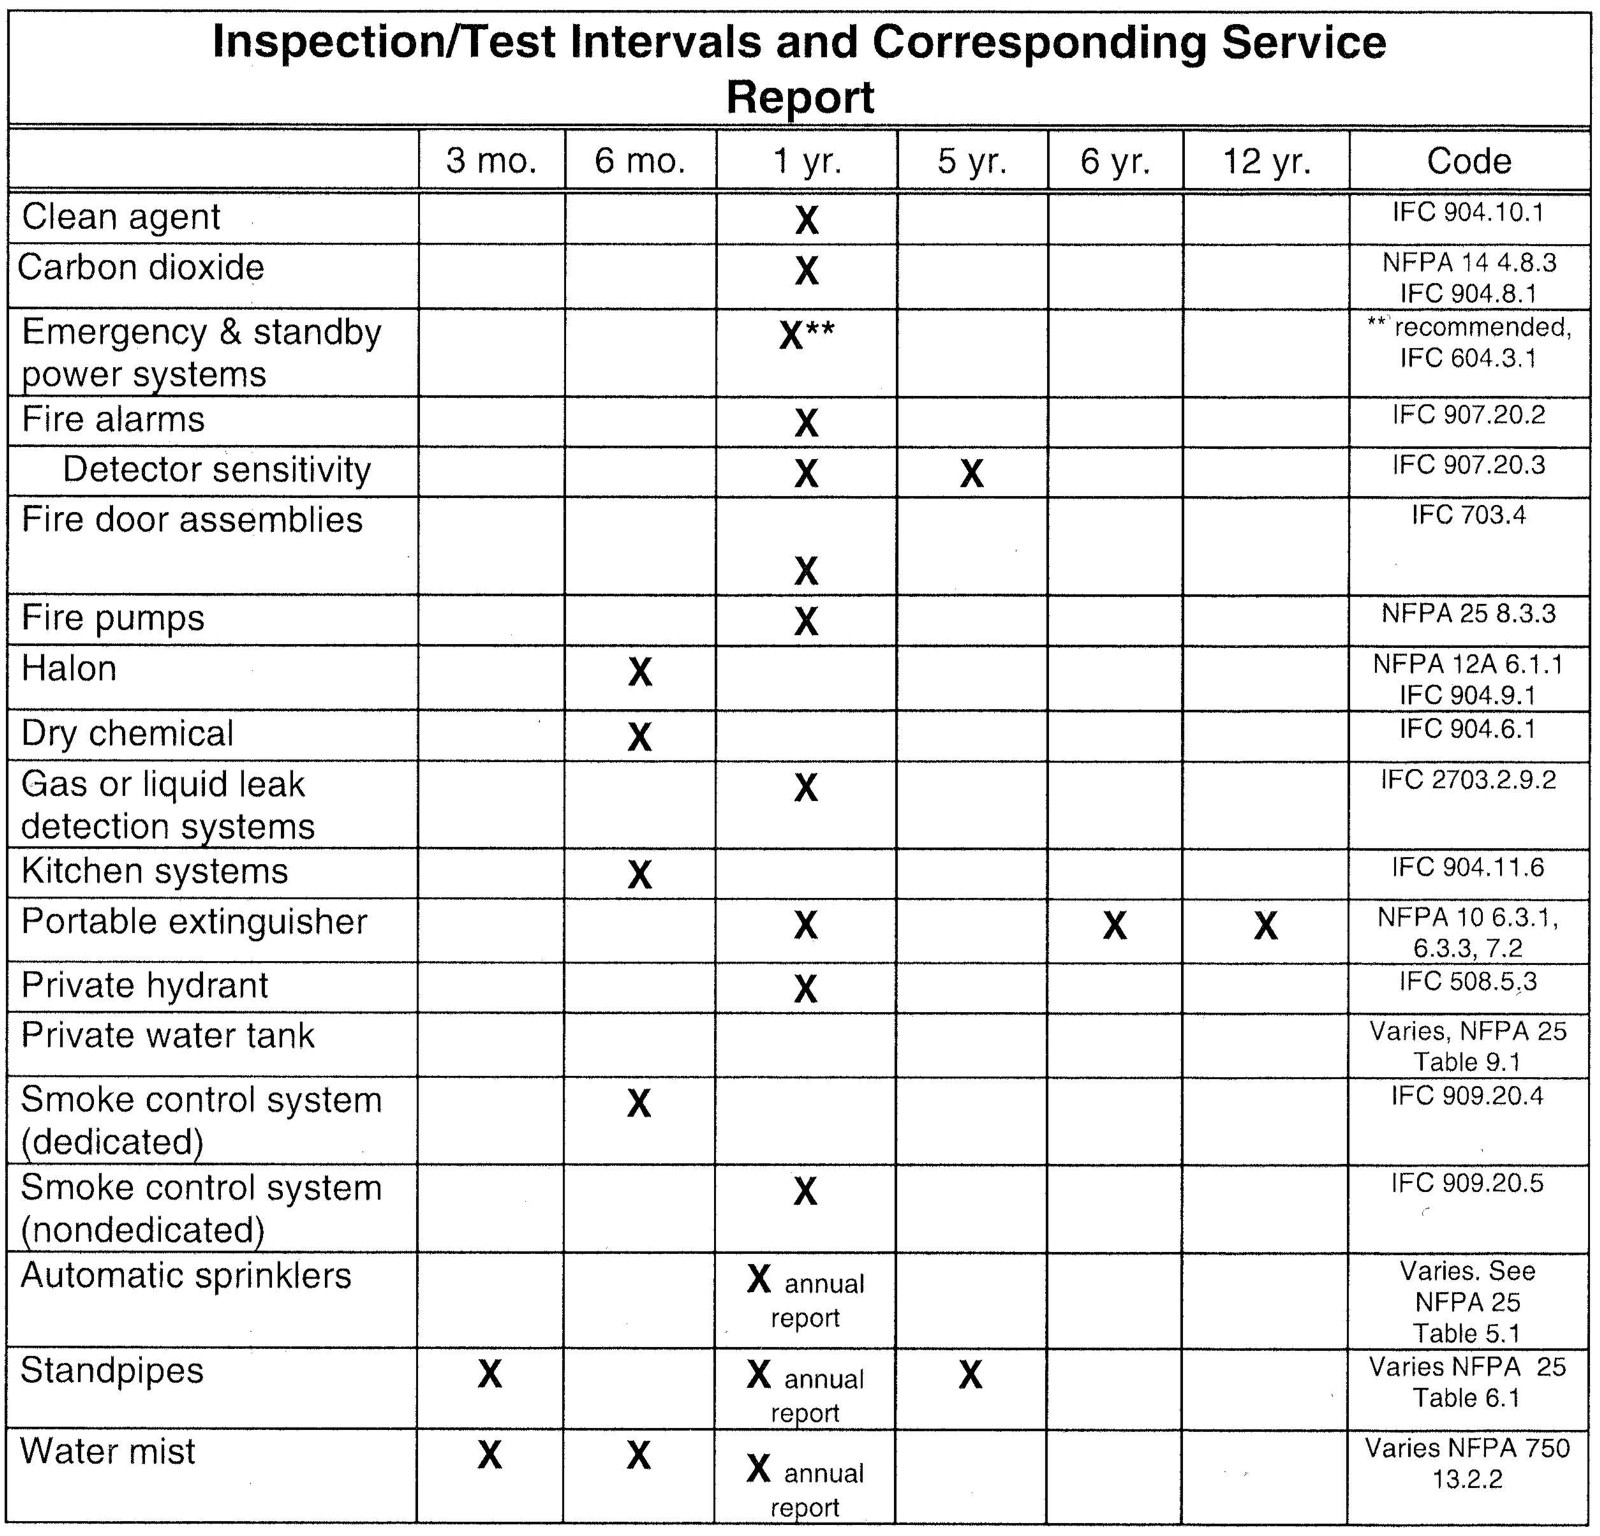 Inspection and Test Intervals for Fire Suppression Systems